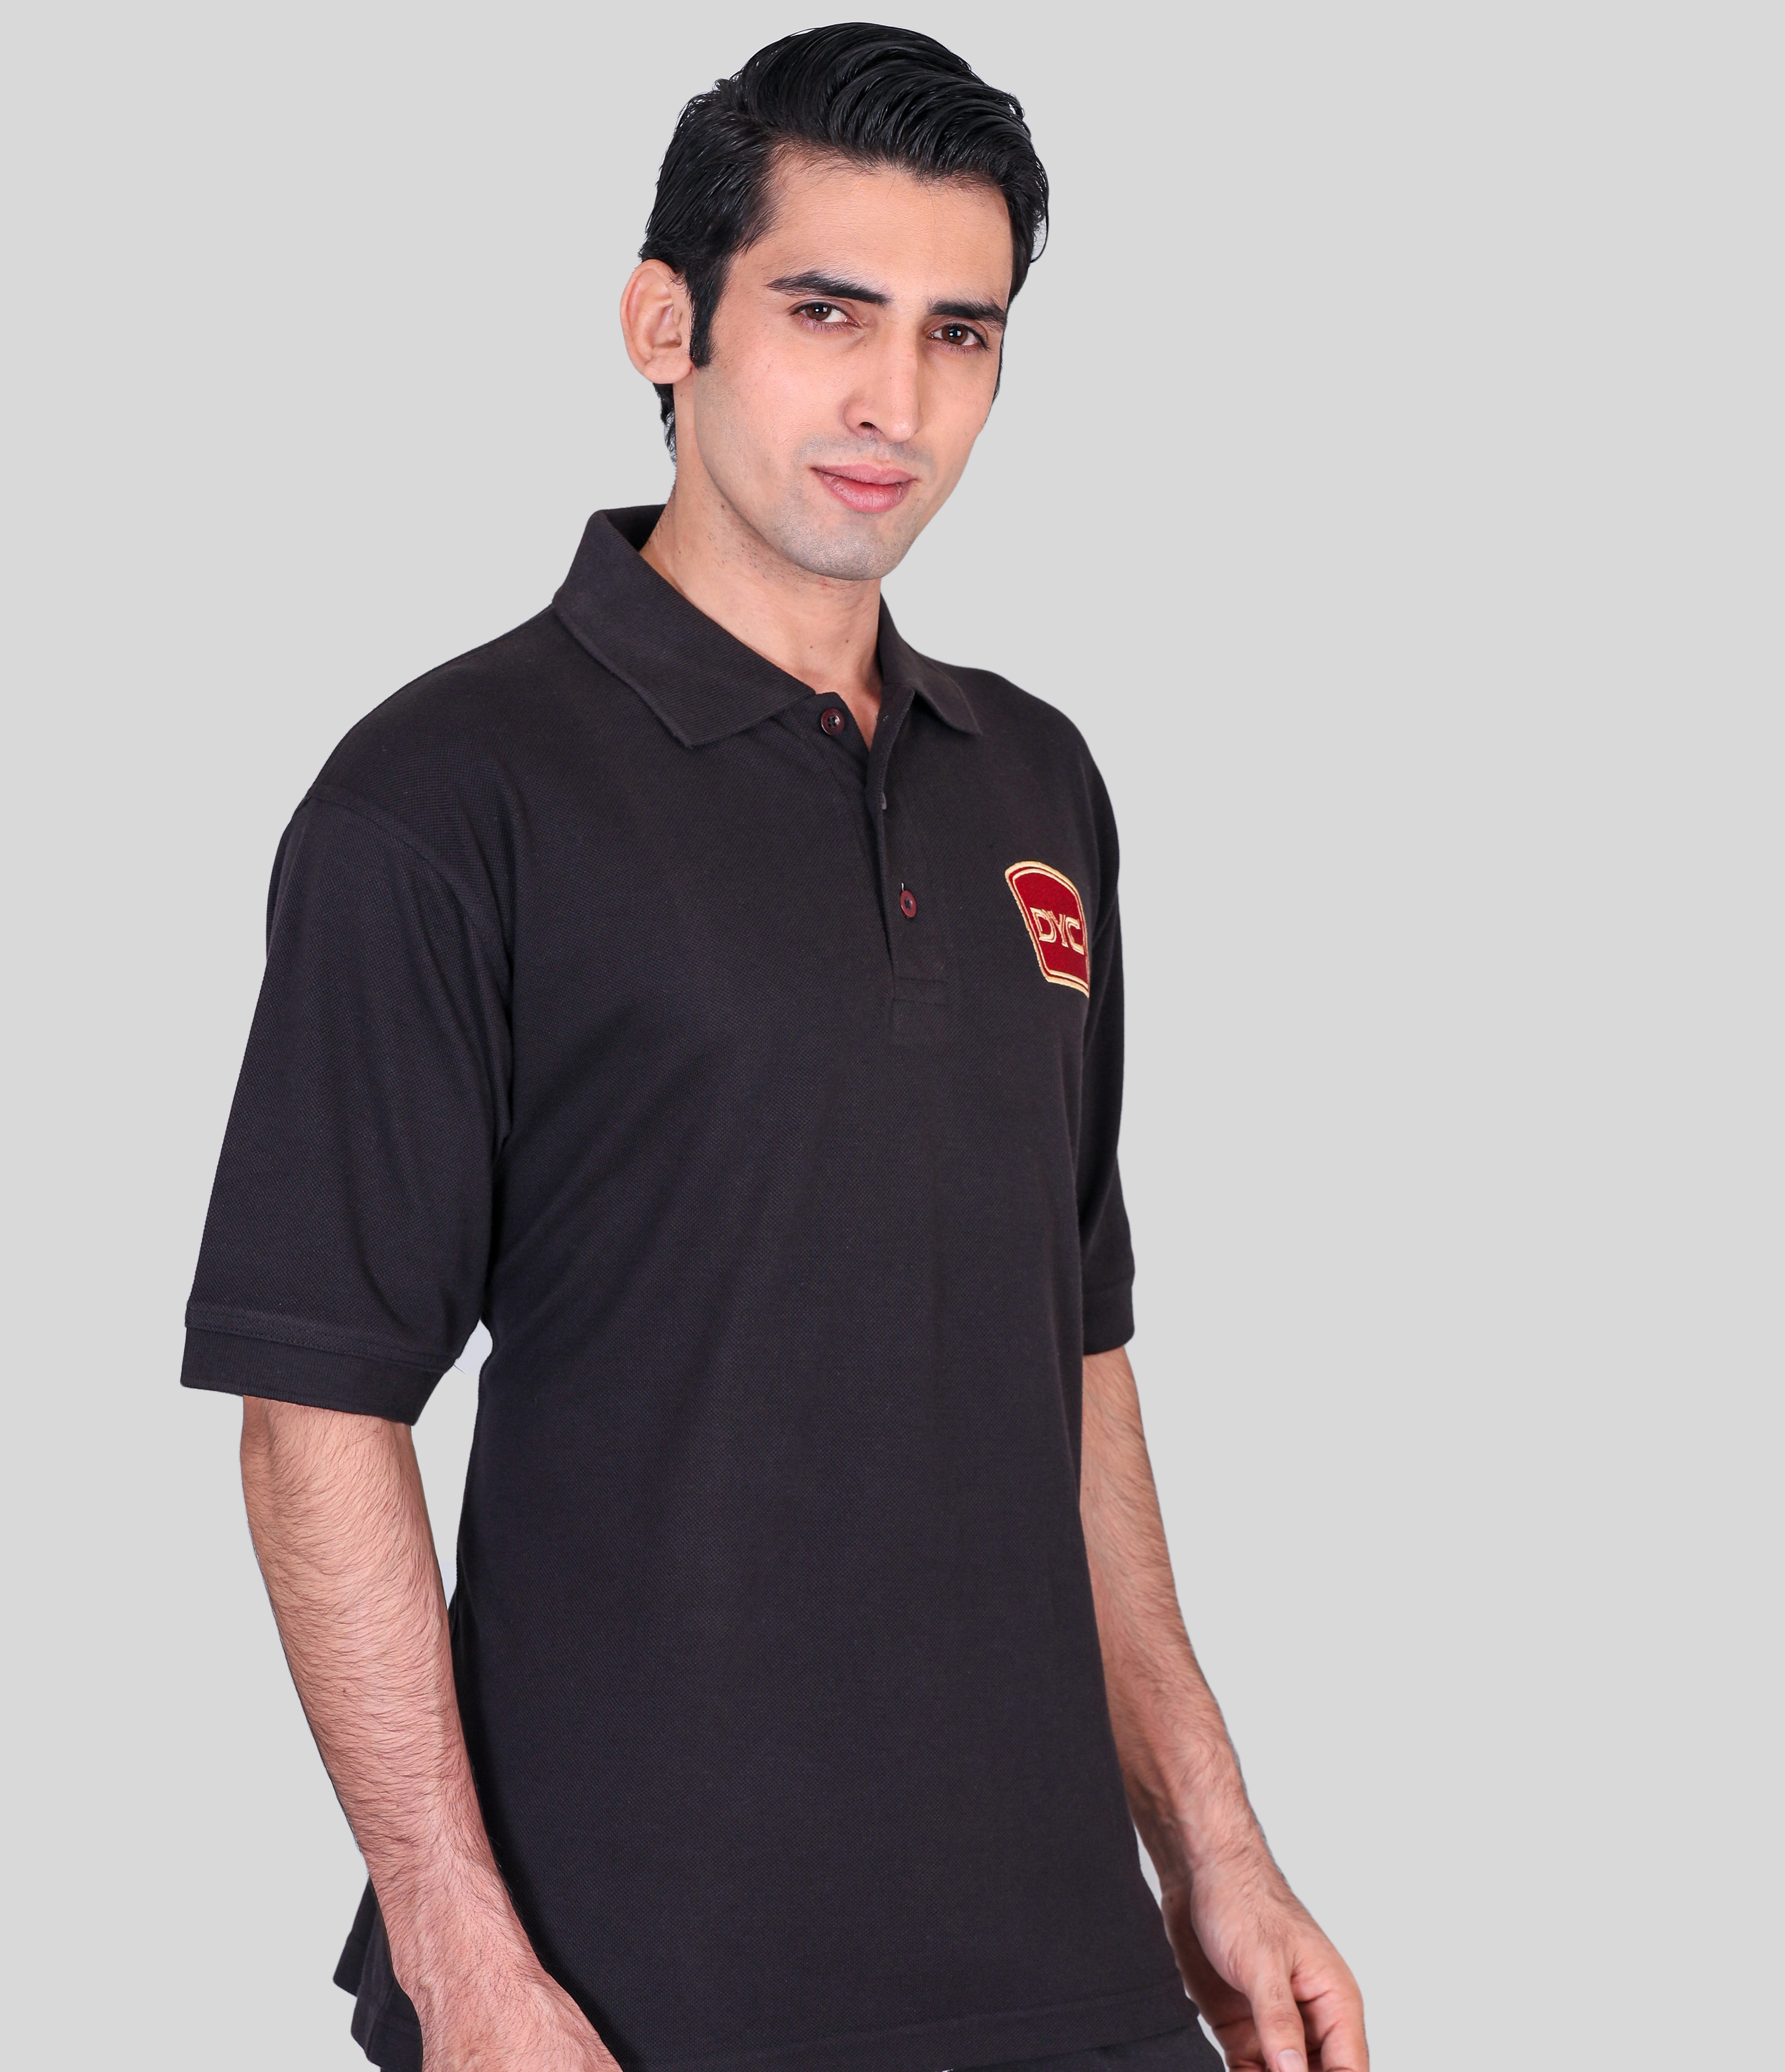 Dyc black promotional polo t-shirts supplier 